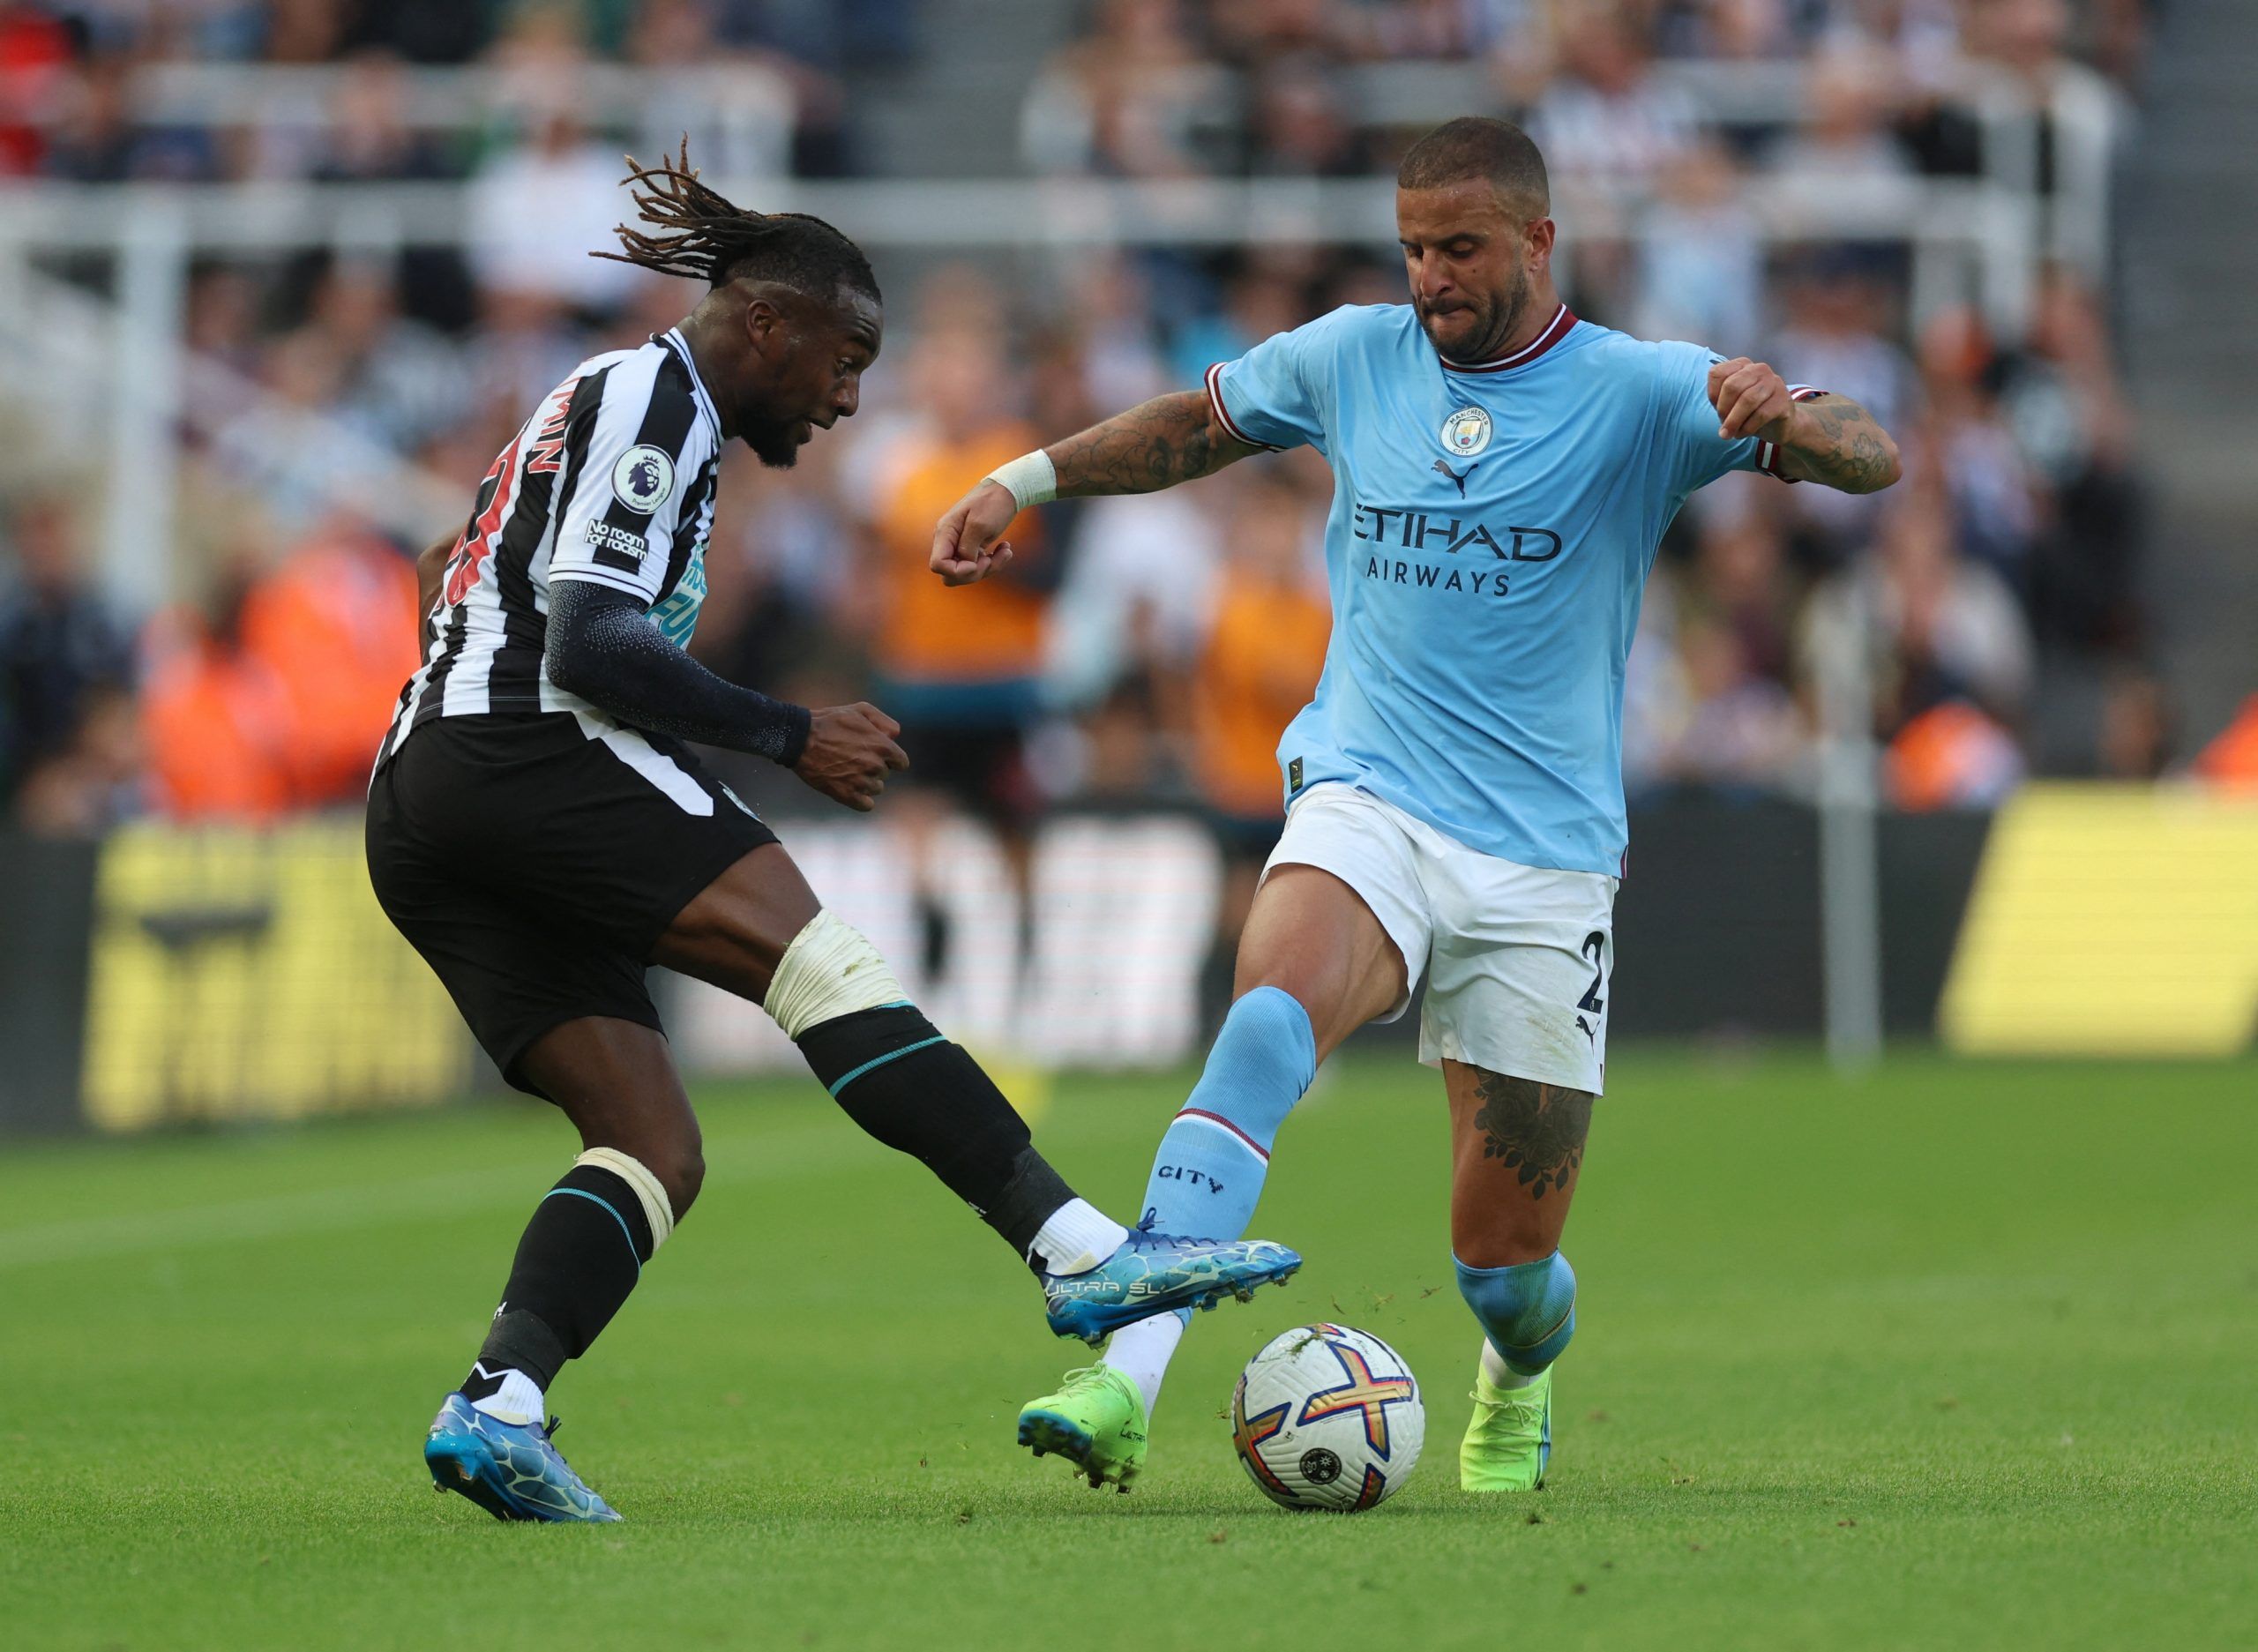 Man City: Kyle Walker likely to miss game vs Wolves -Manchester City News